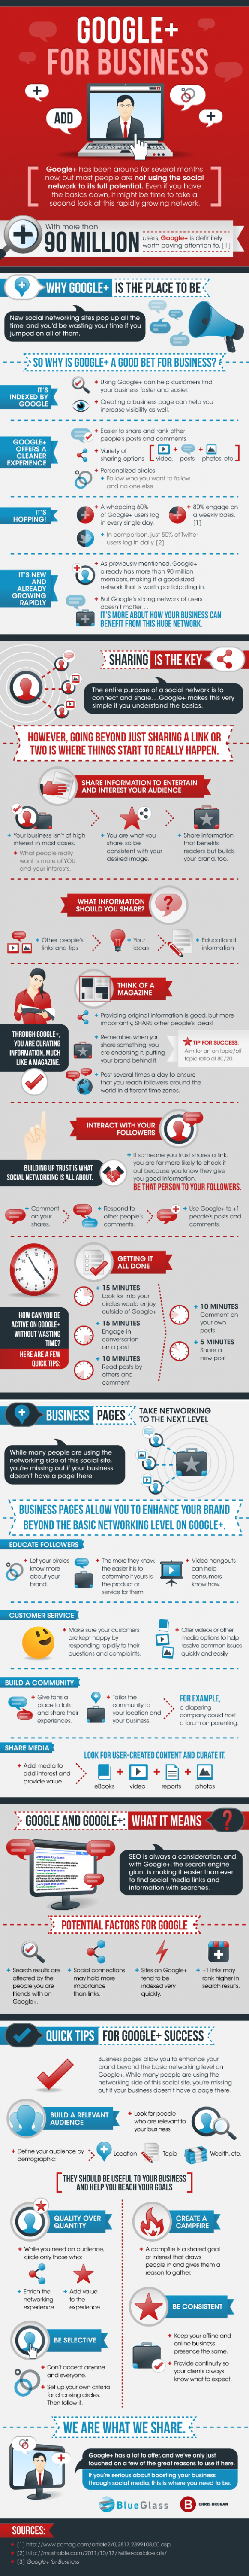 Google+ for Business. What It can do for yours. An infographic.